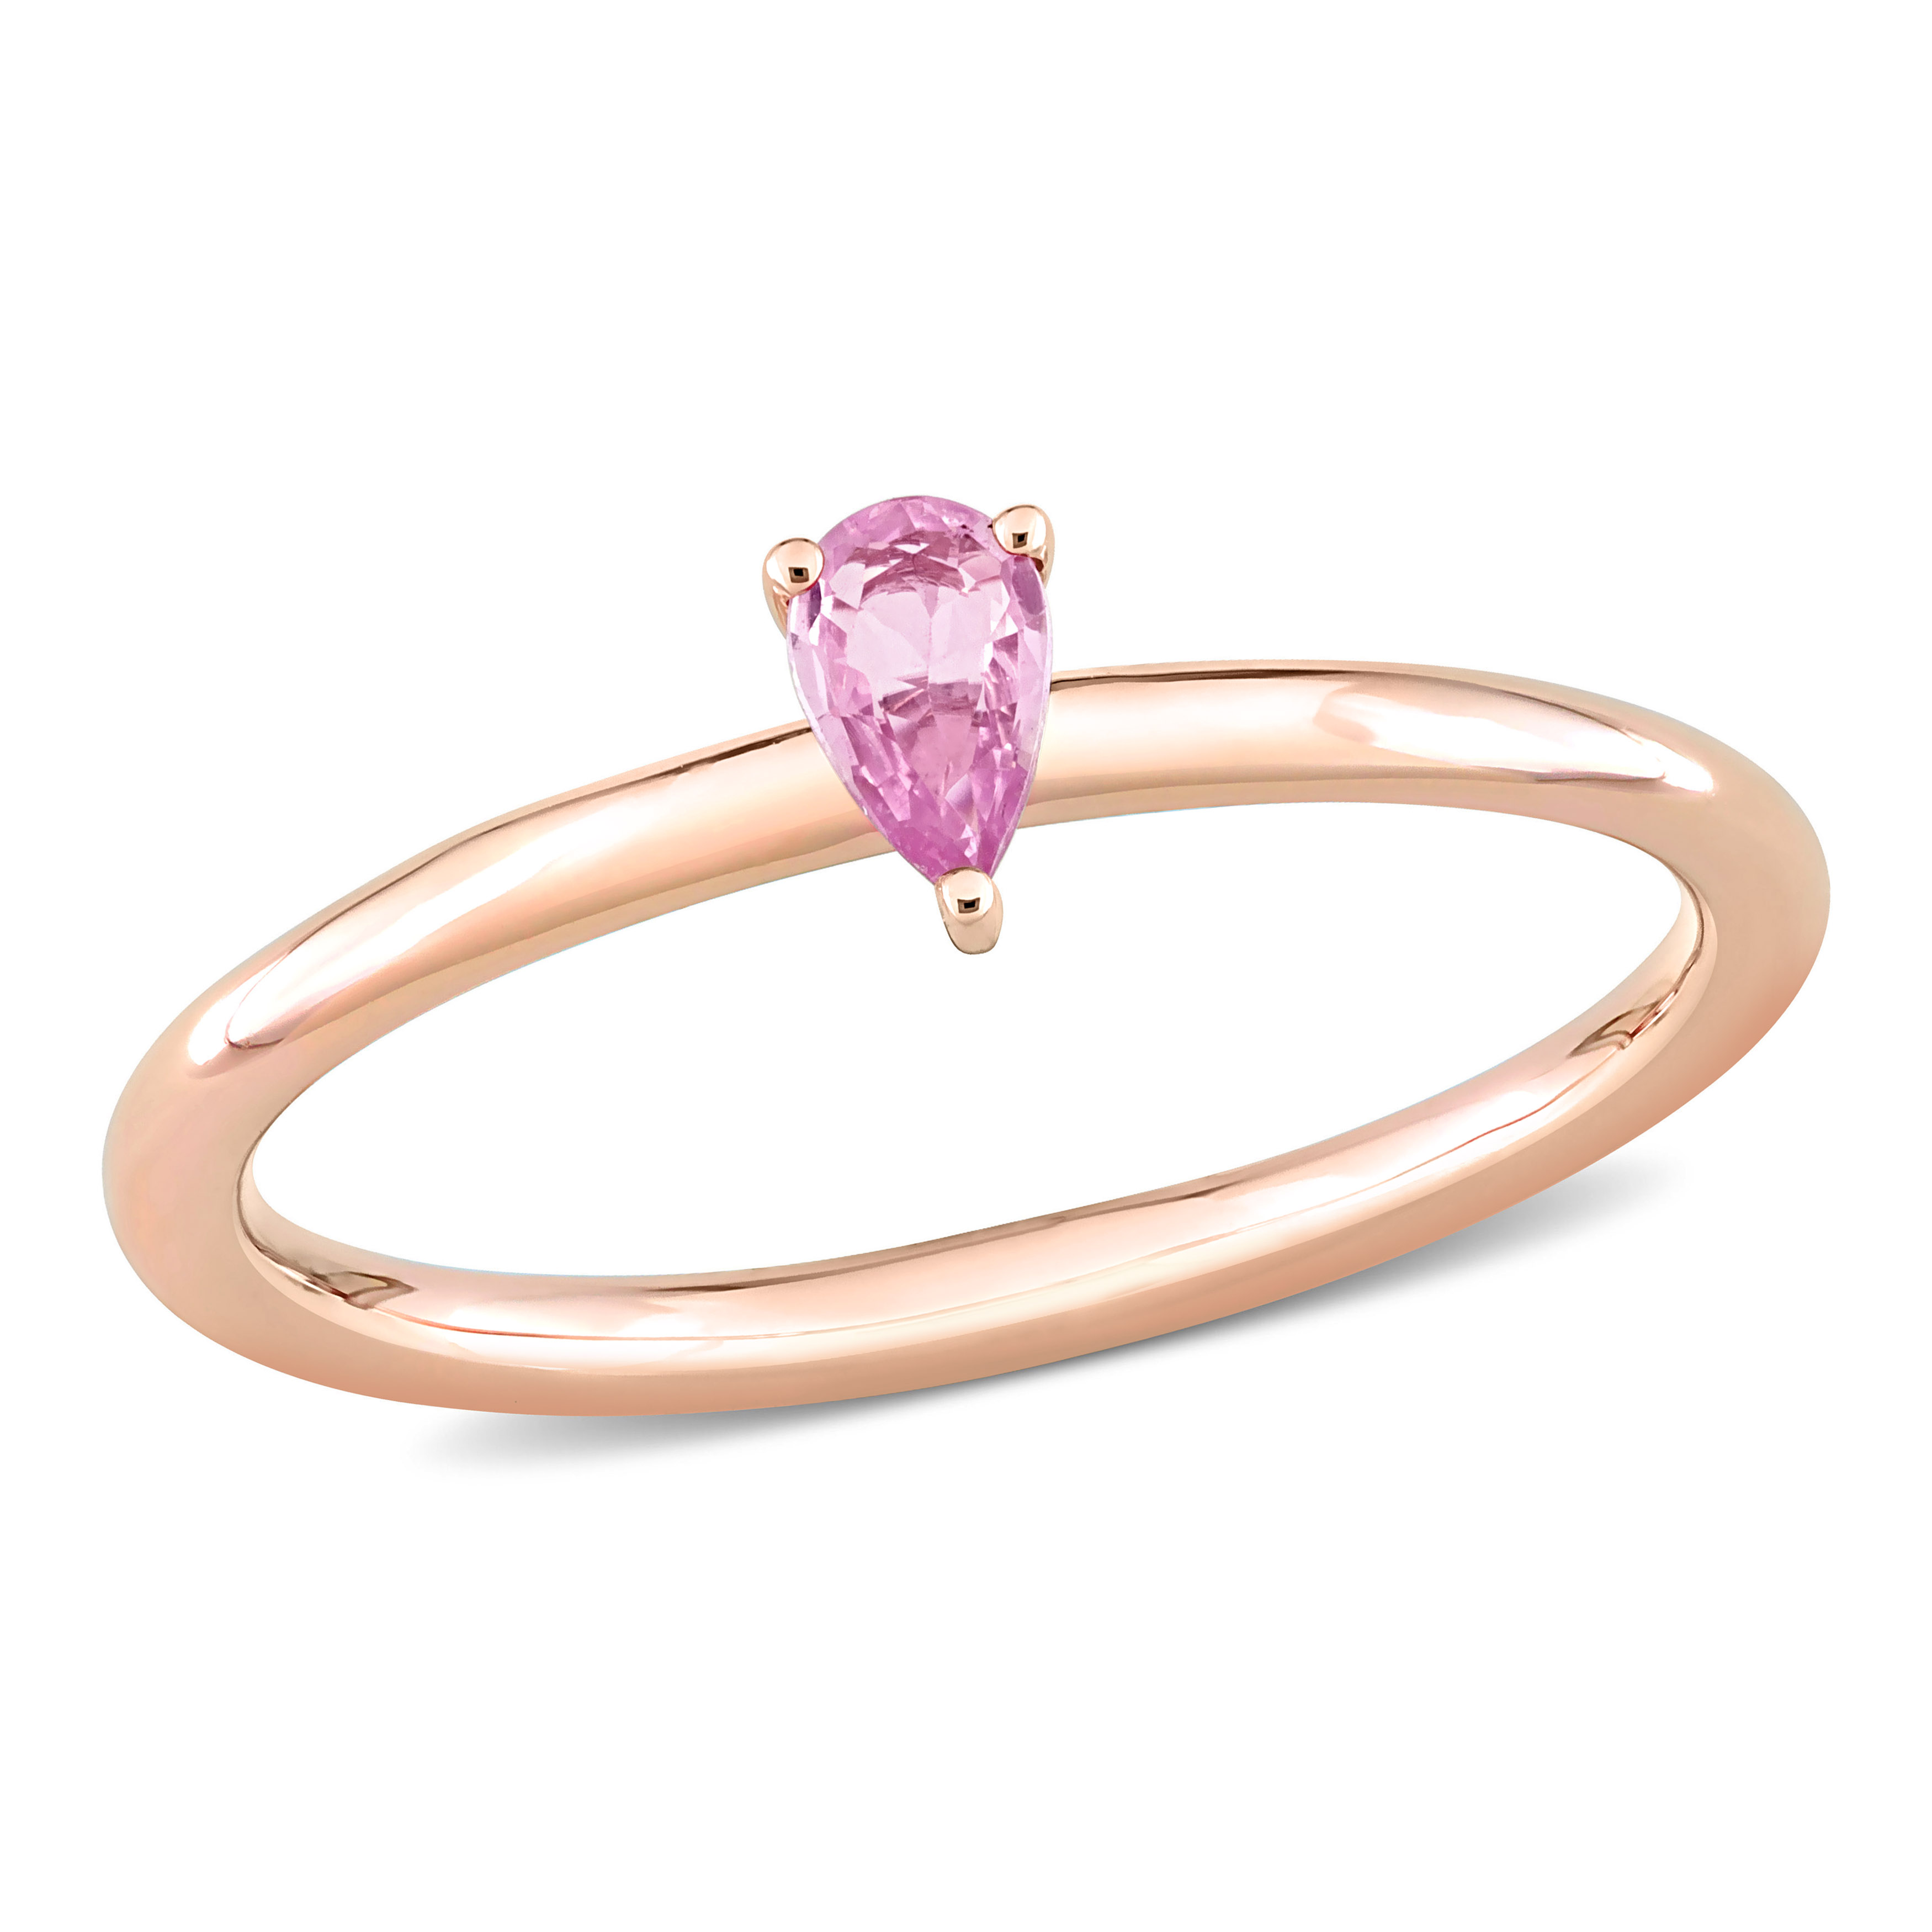 1/4 CT TGW Pear Pink Sapphire Stackable Ring in 10k Rose Gold